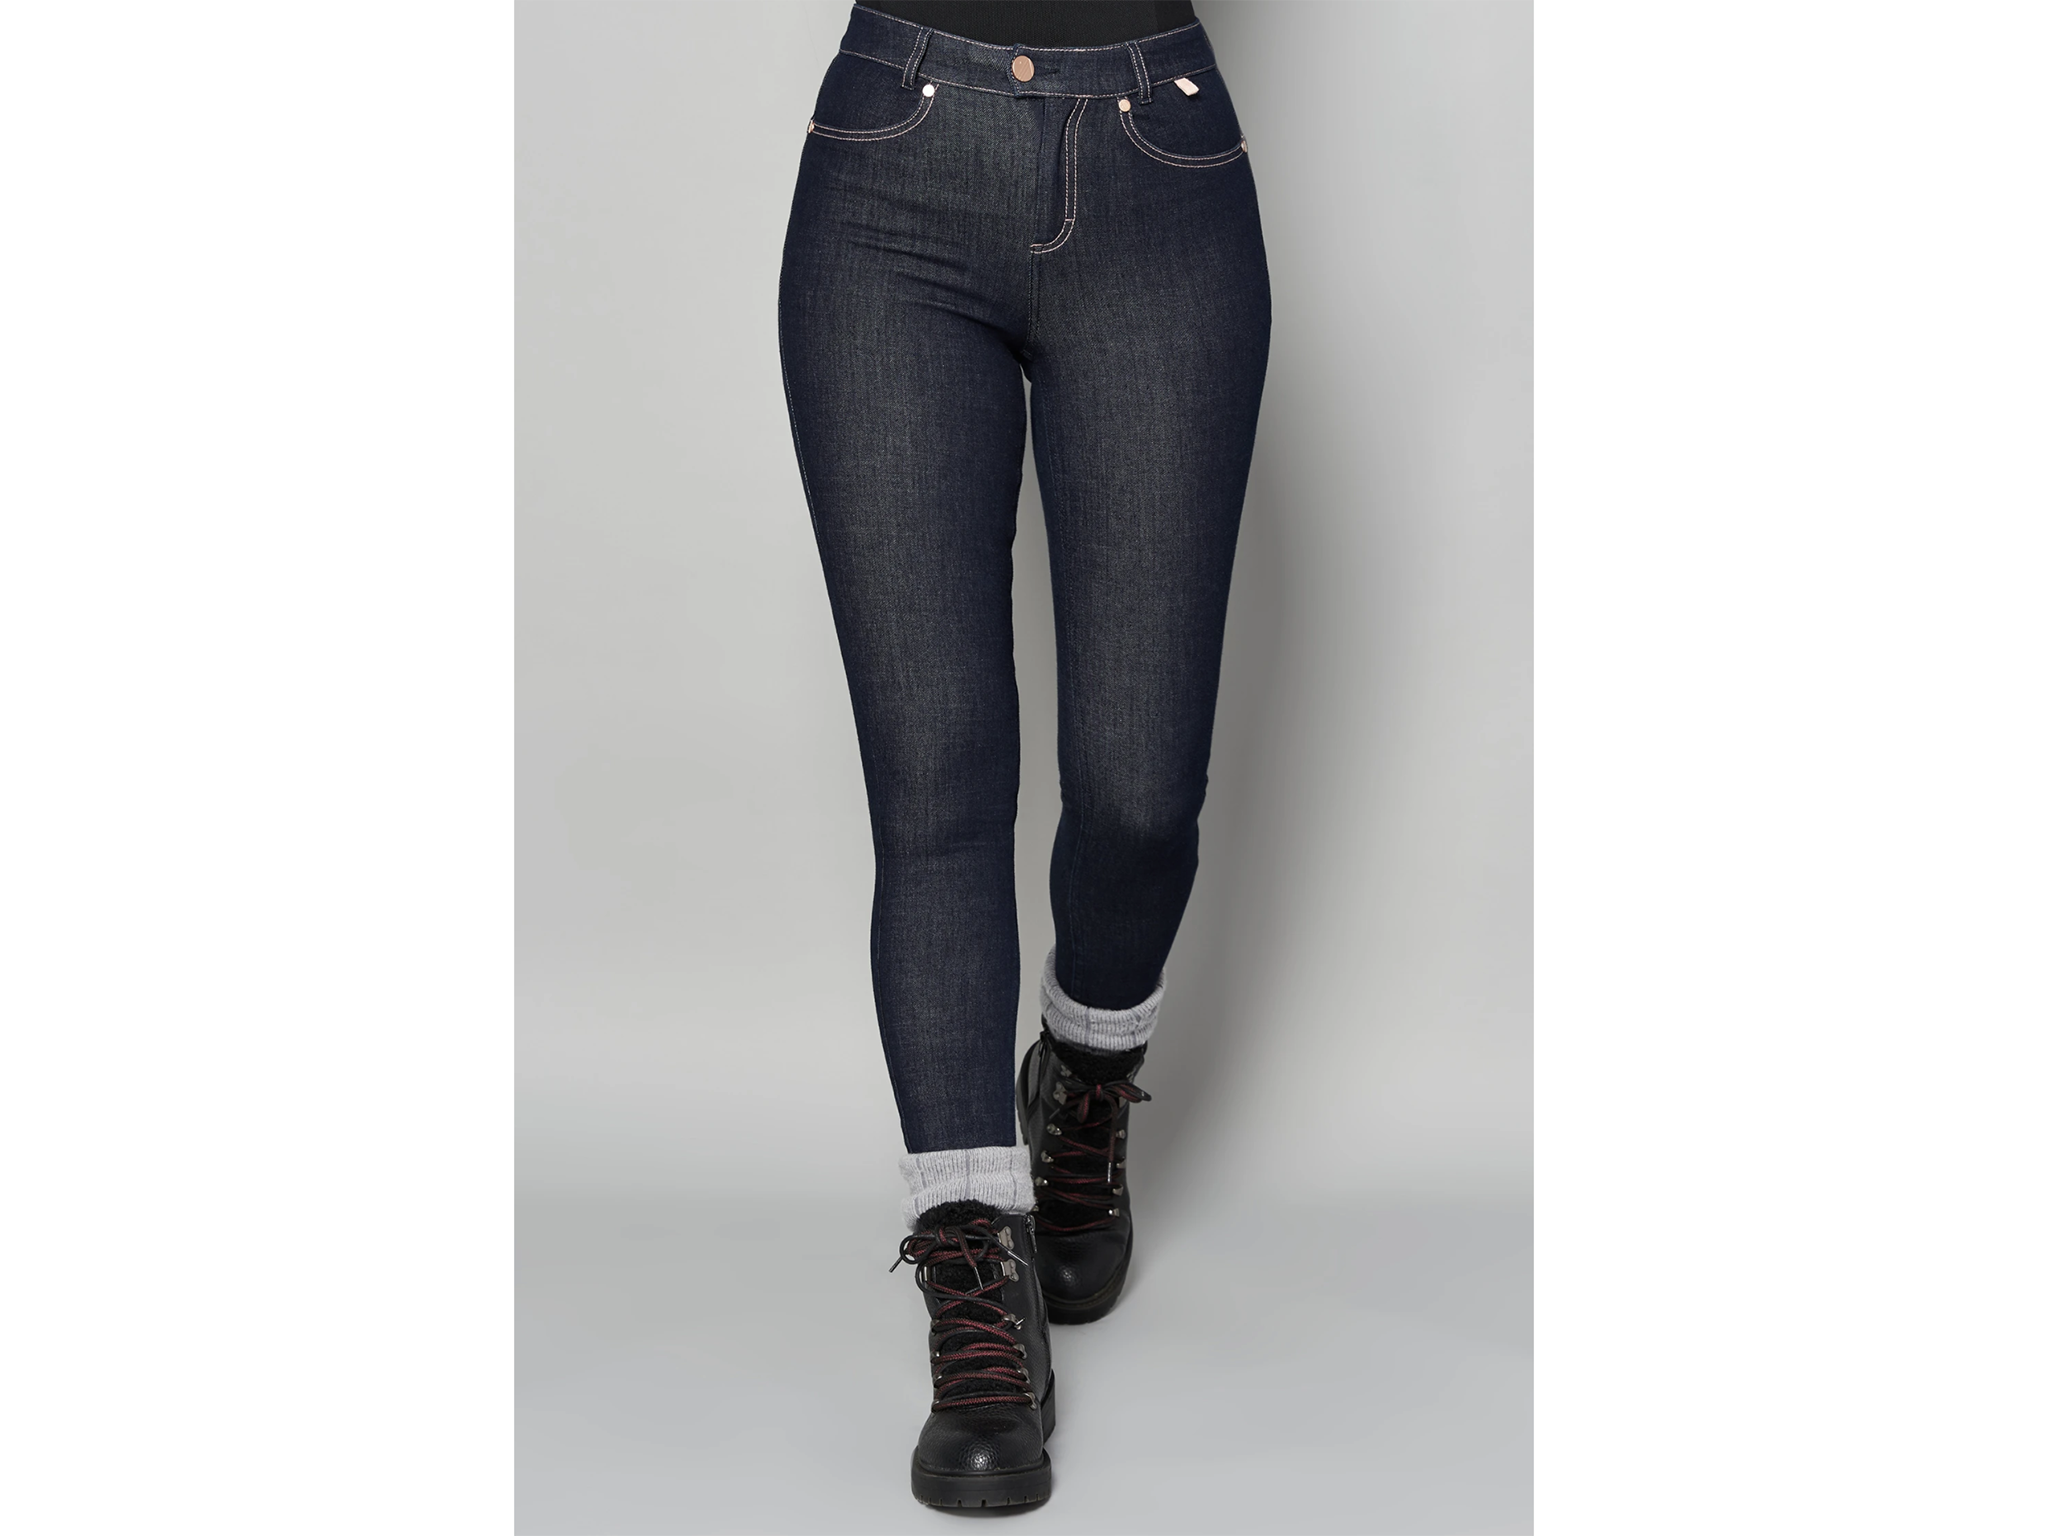 acai-outdoorwear-fleece-lined-jeans-indybest.png